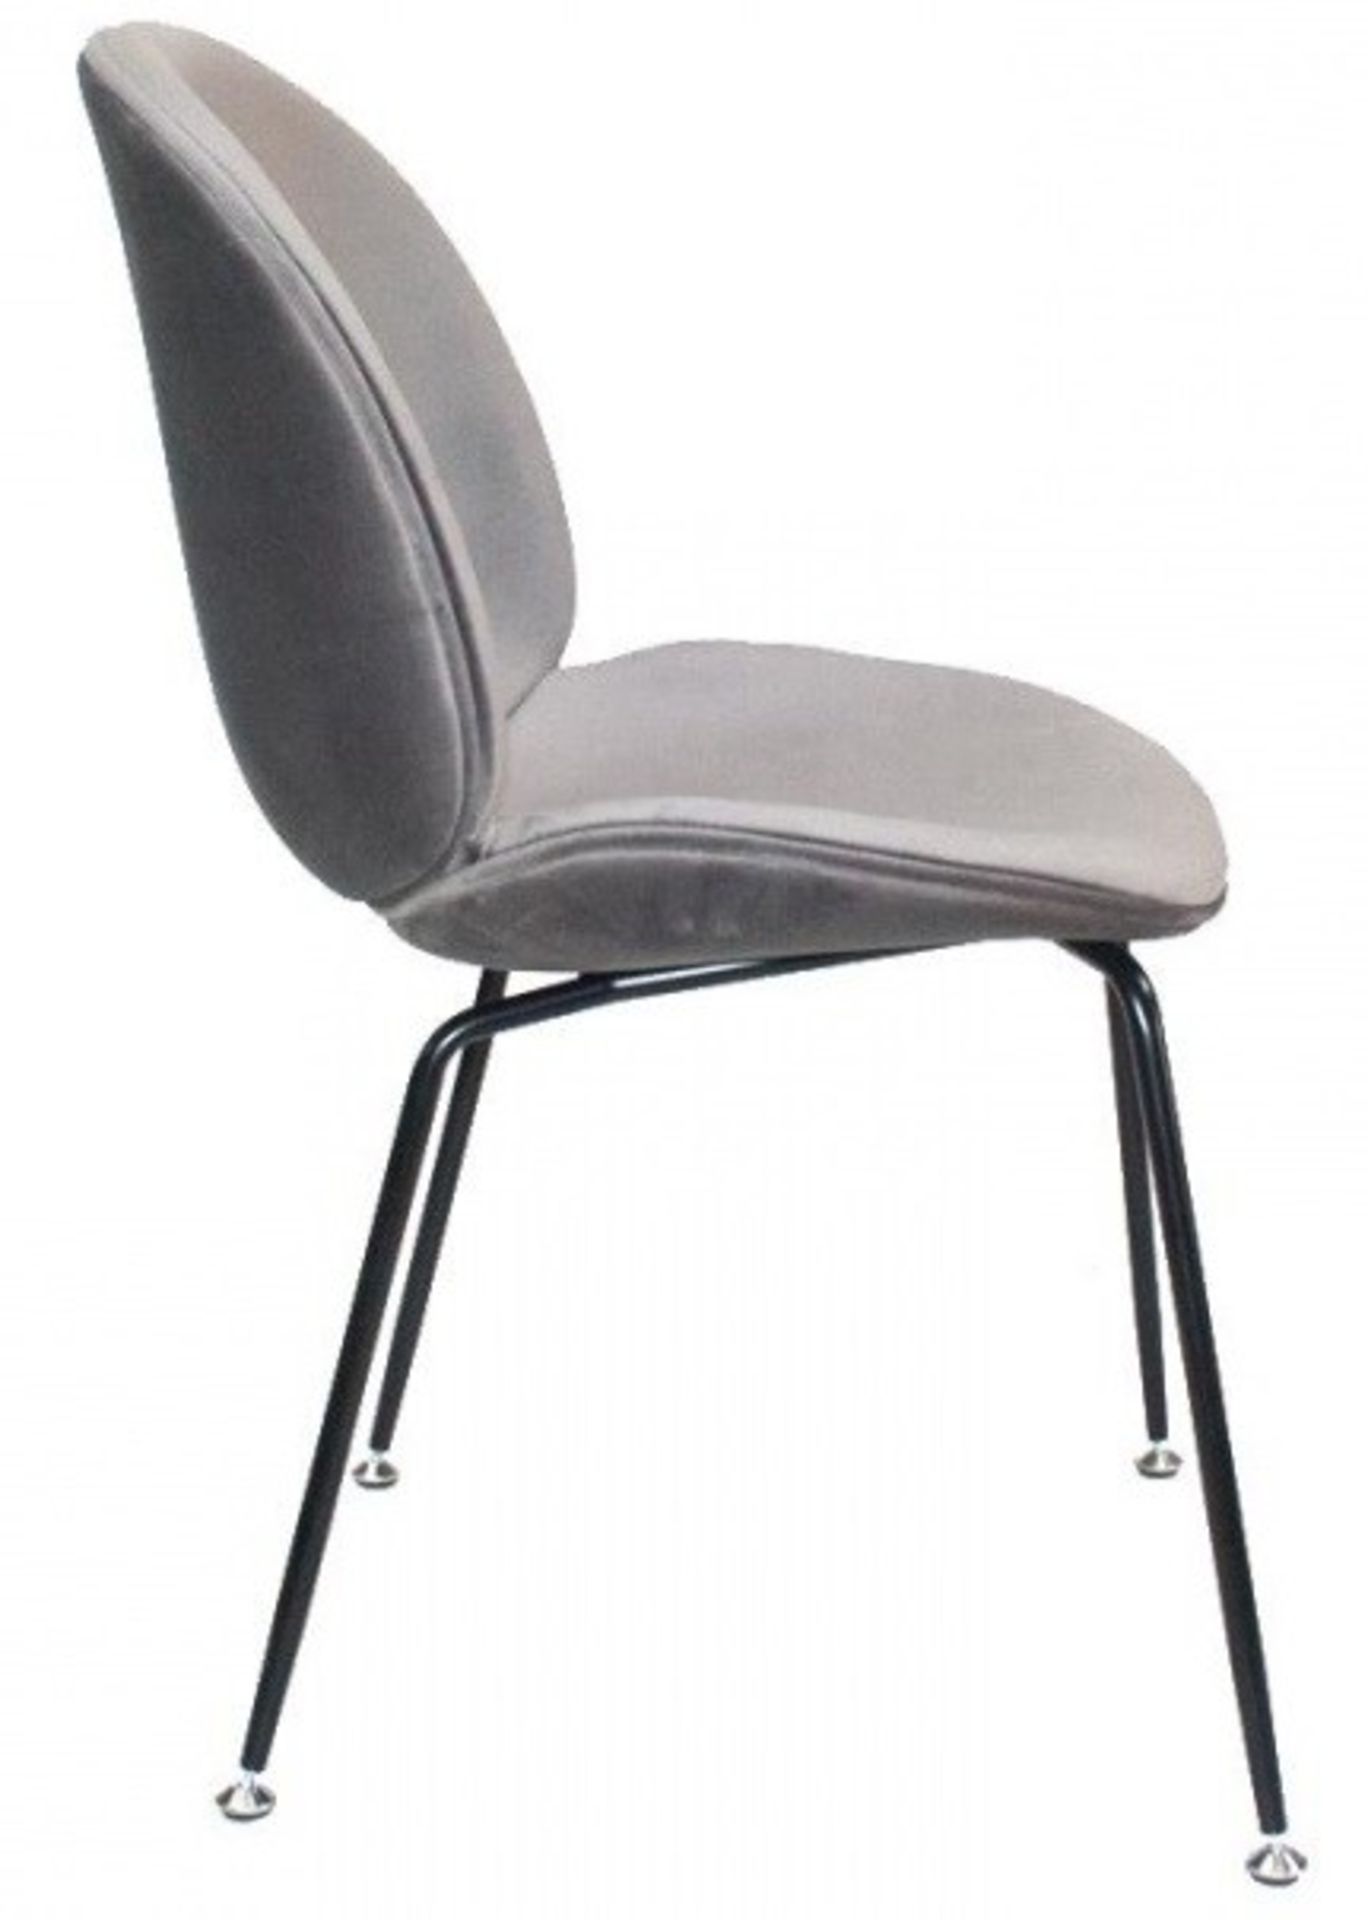 4 x GRACE Upholstered Contemporary Dining Chairs In Grey Velvet - Dimensions: W48 x D50 x H85 cm - - Image 3 of 3